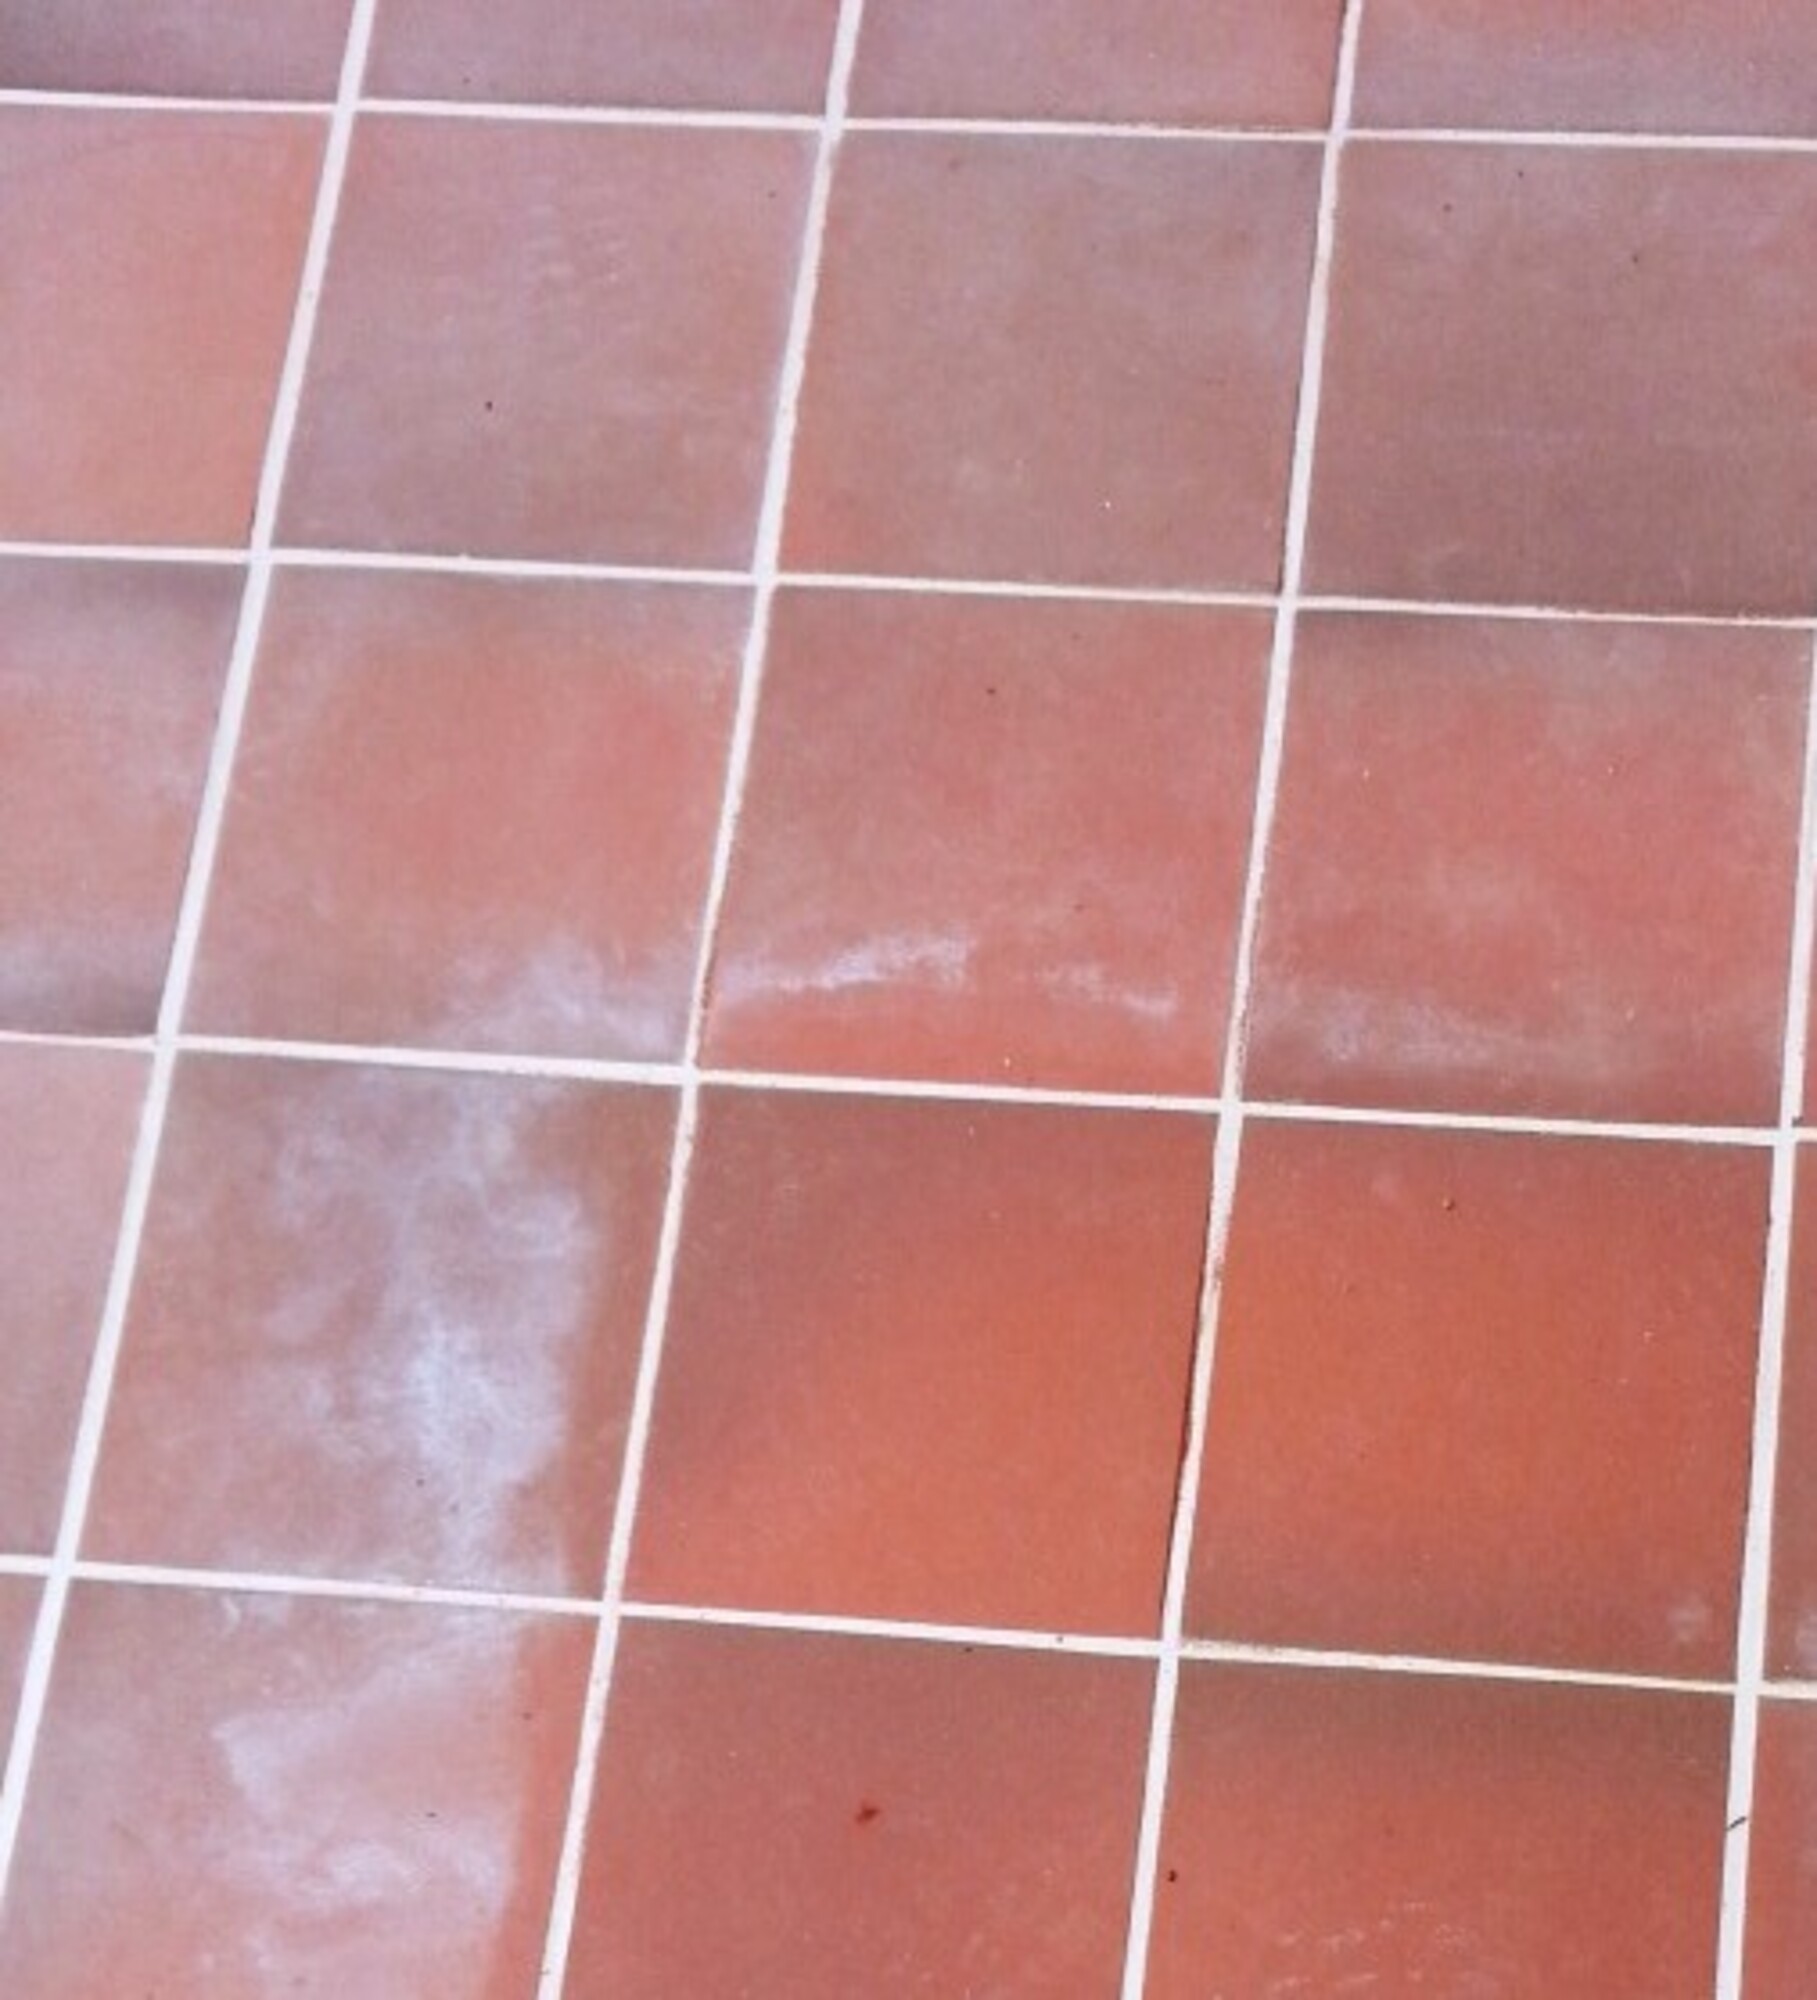 Grout Haze Remover Residue, How To Remove Sealer Residue From Tile